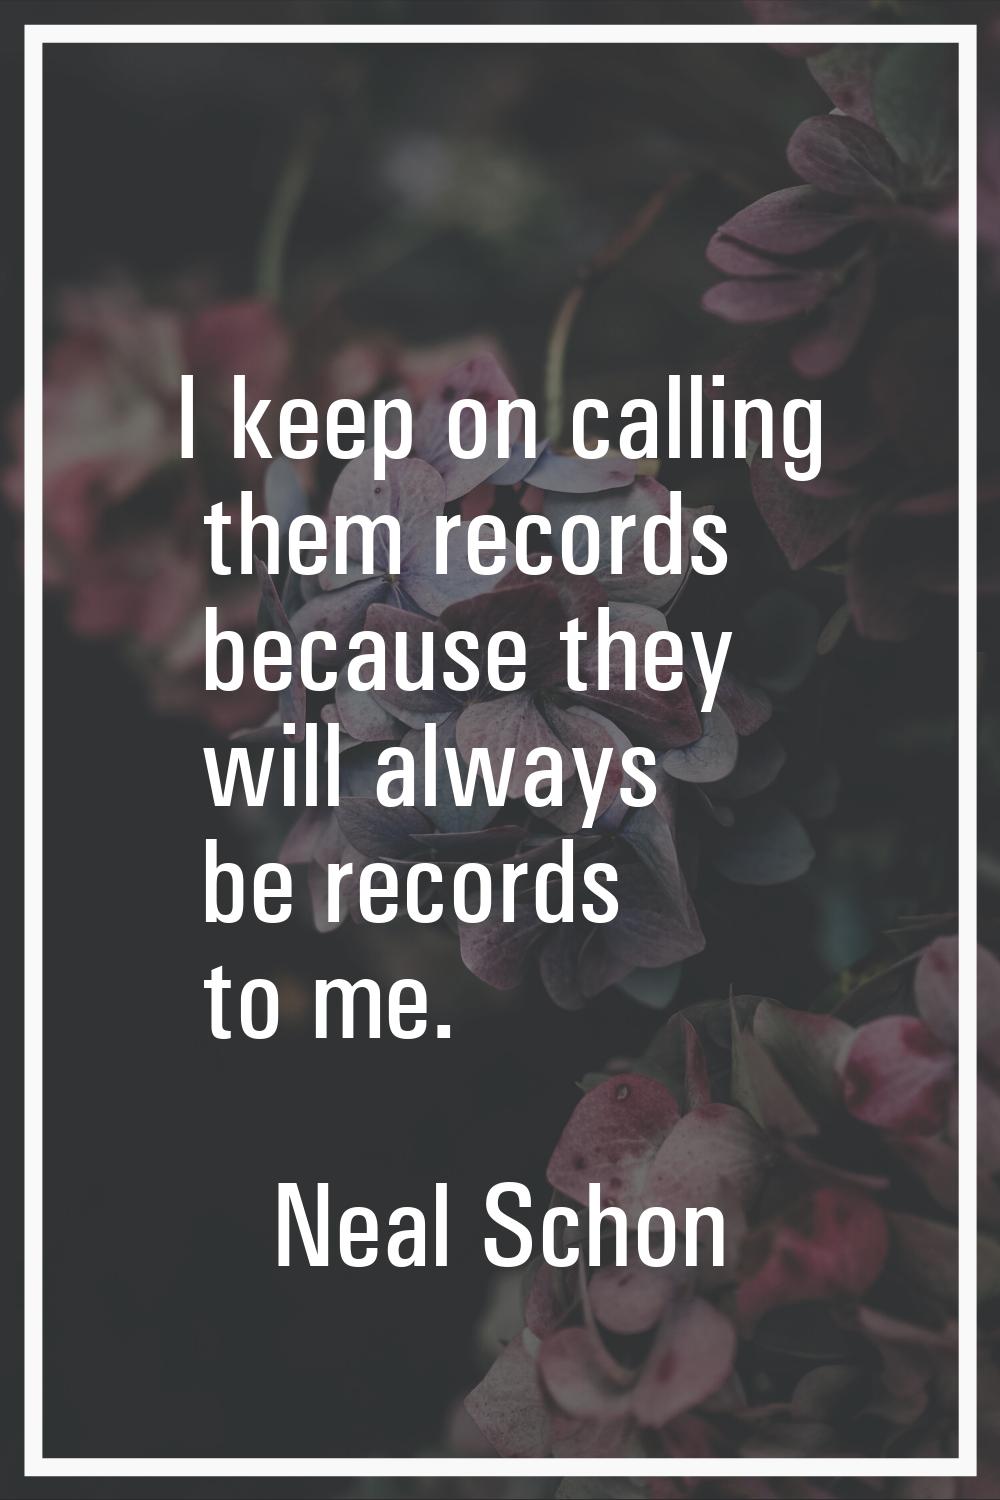 I keep on calling them records because they will always be records to me.